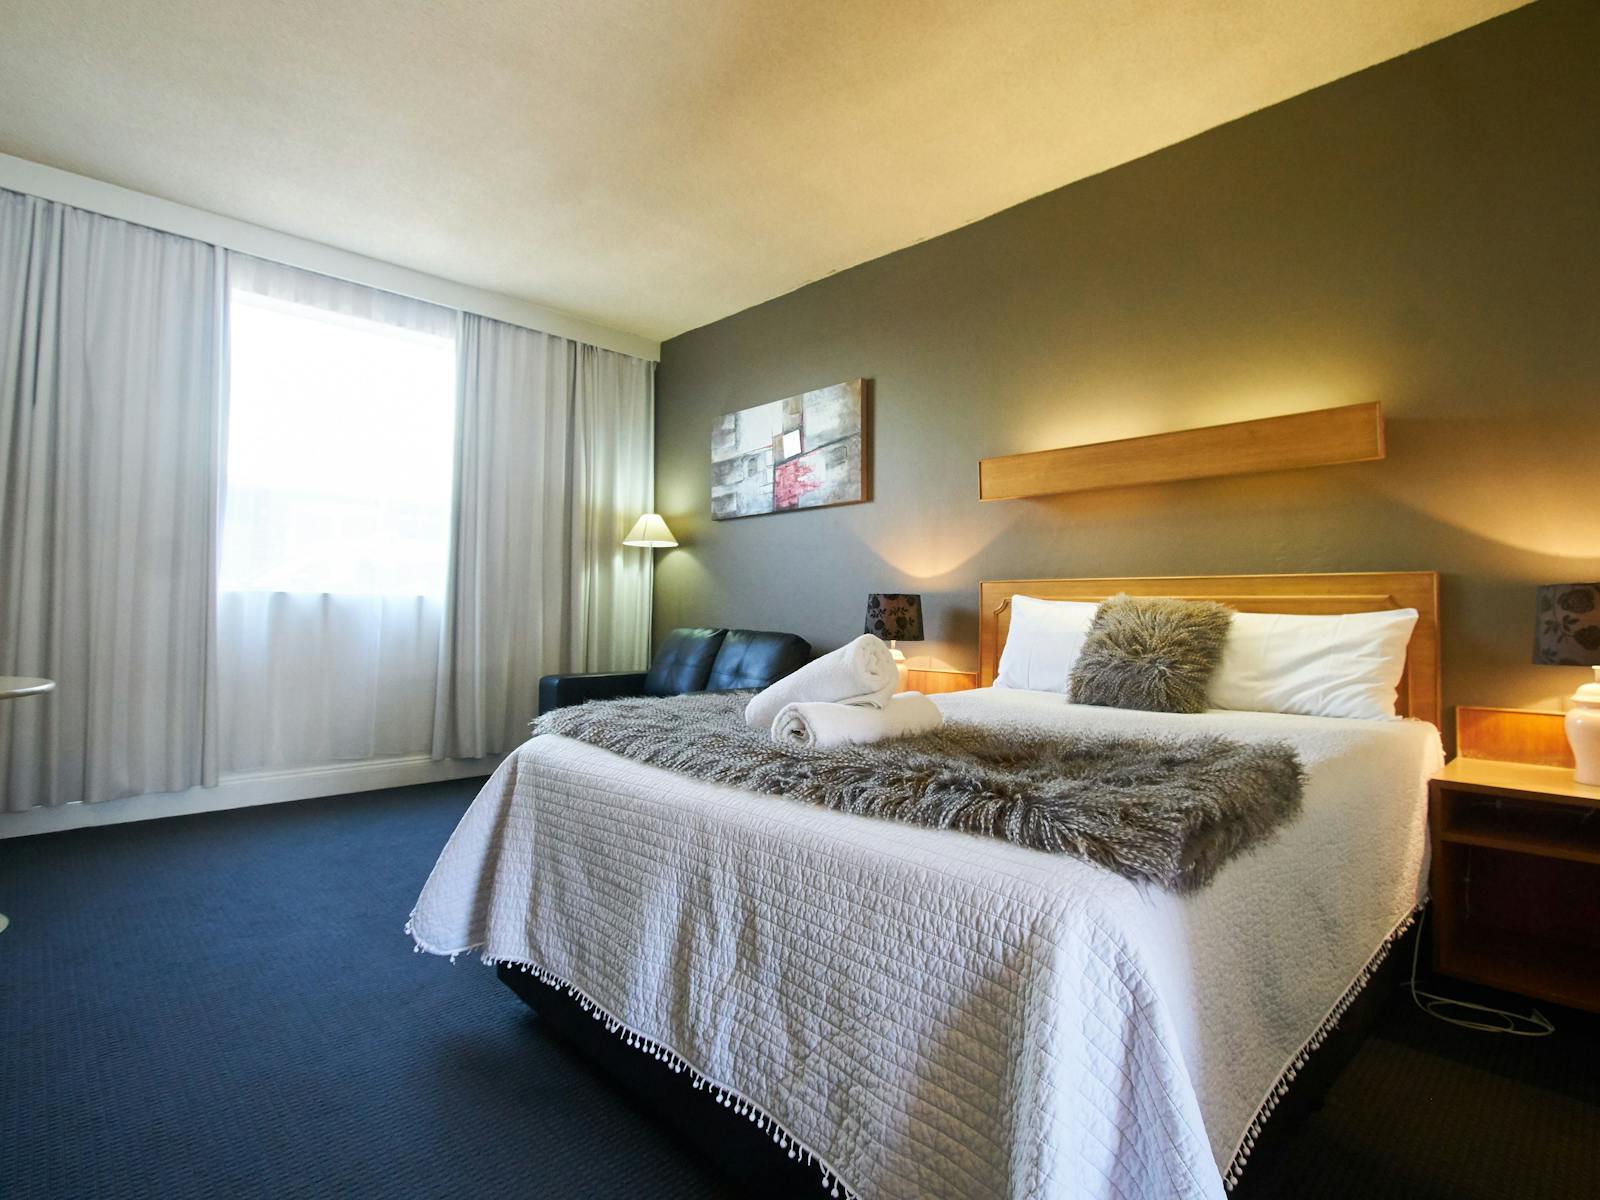 Situated on the ground floor or the second story, these rooms are large and have amenities needed.